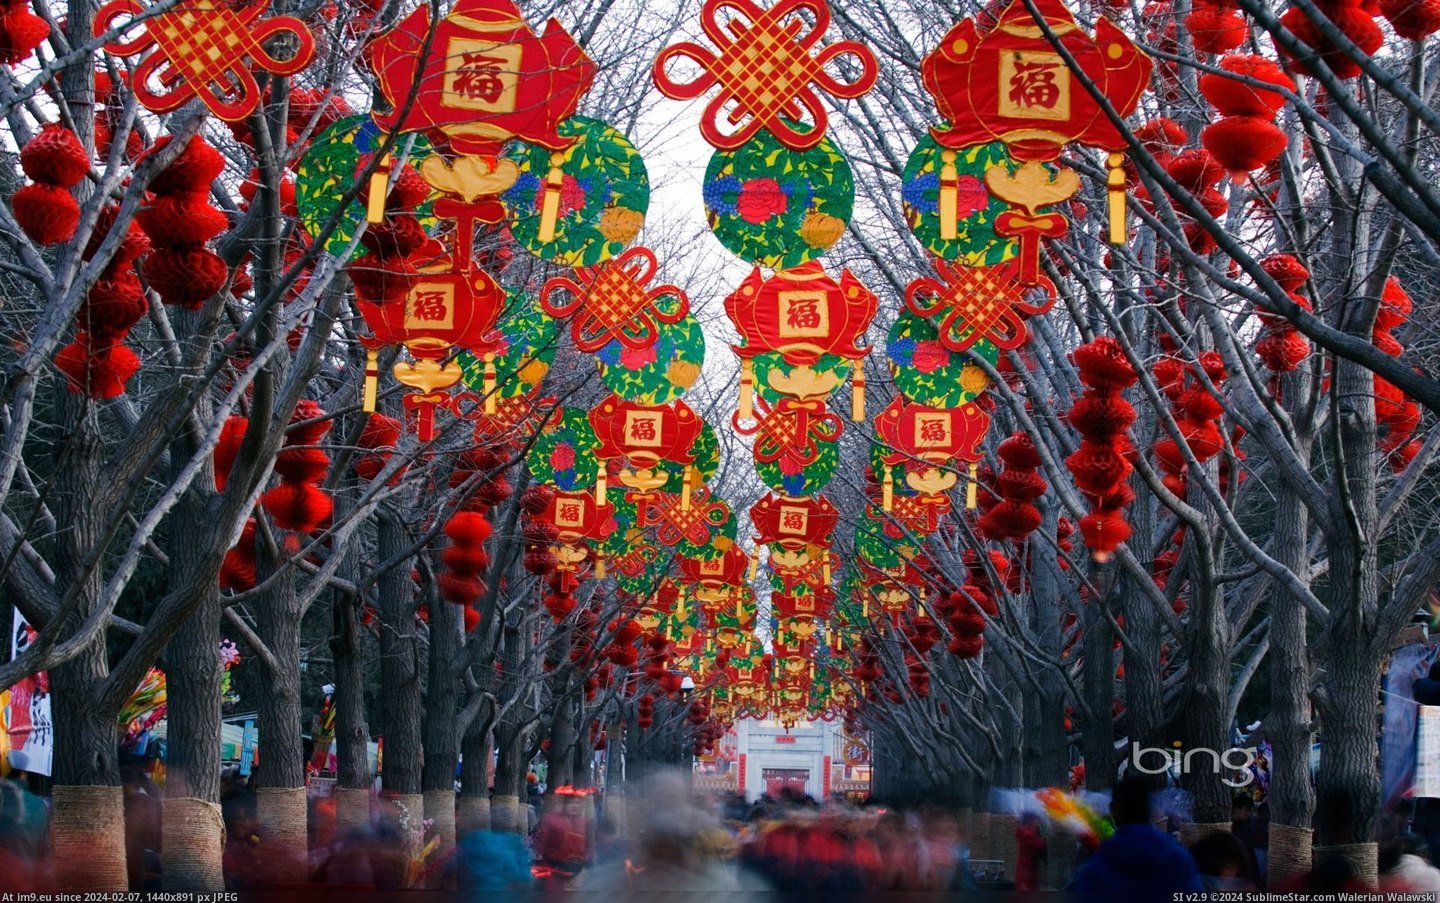 Lantern decorations at Ditán Park in Beijing, China (© Superstock) (in Best photos of February 2013)